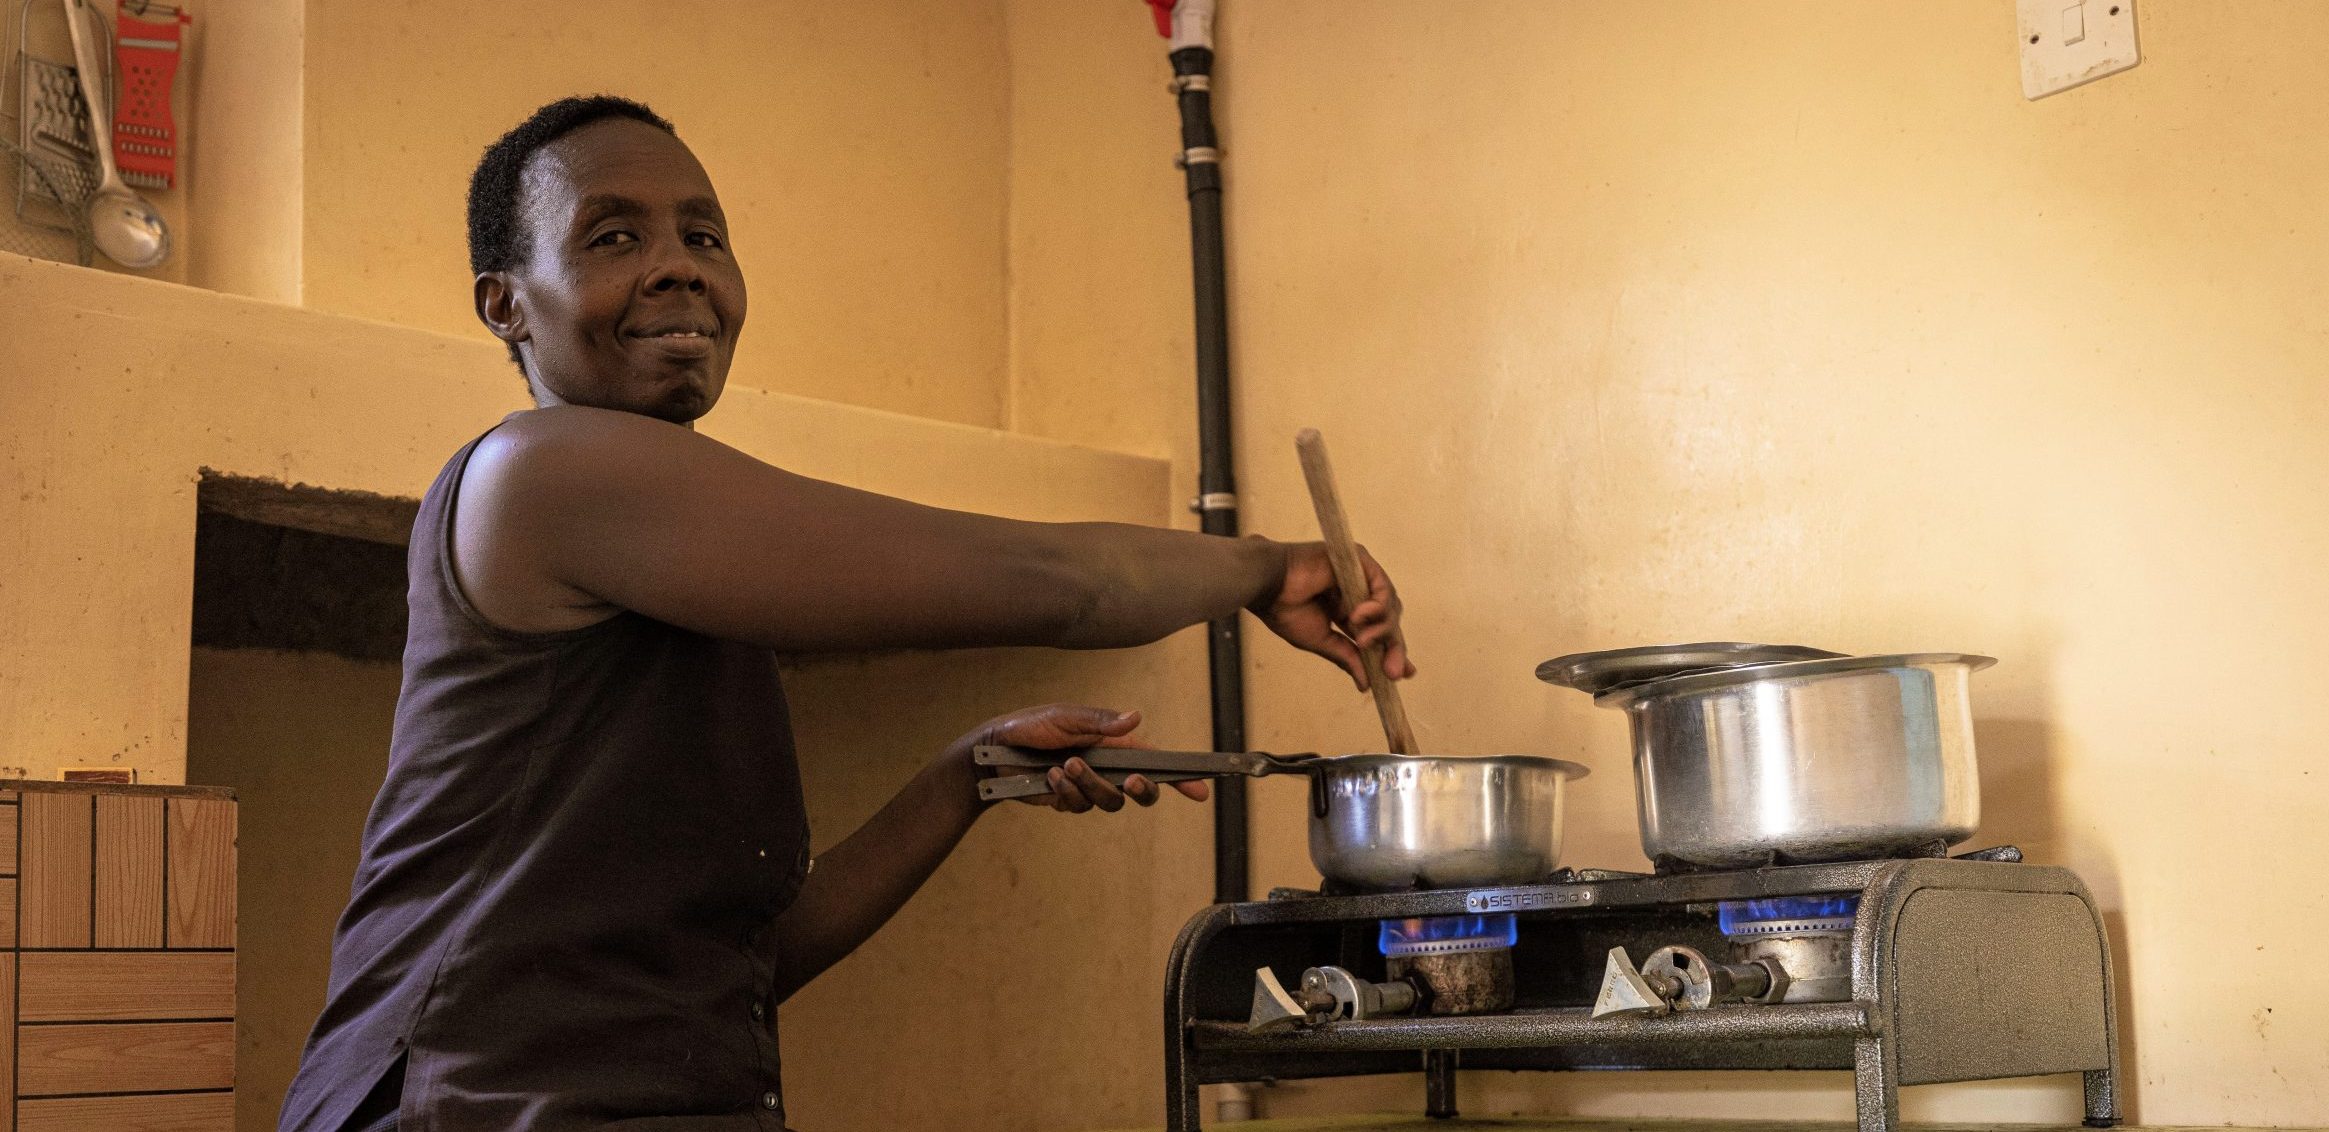 No gender equality without access to clean cooking